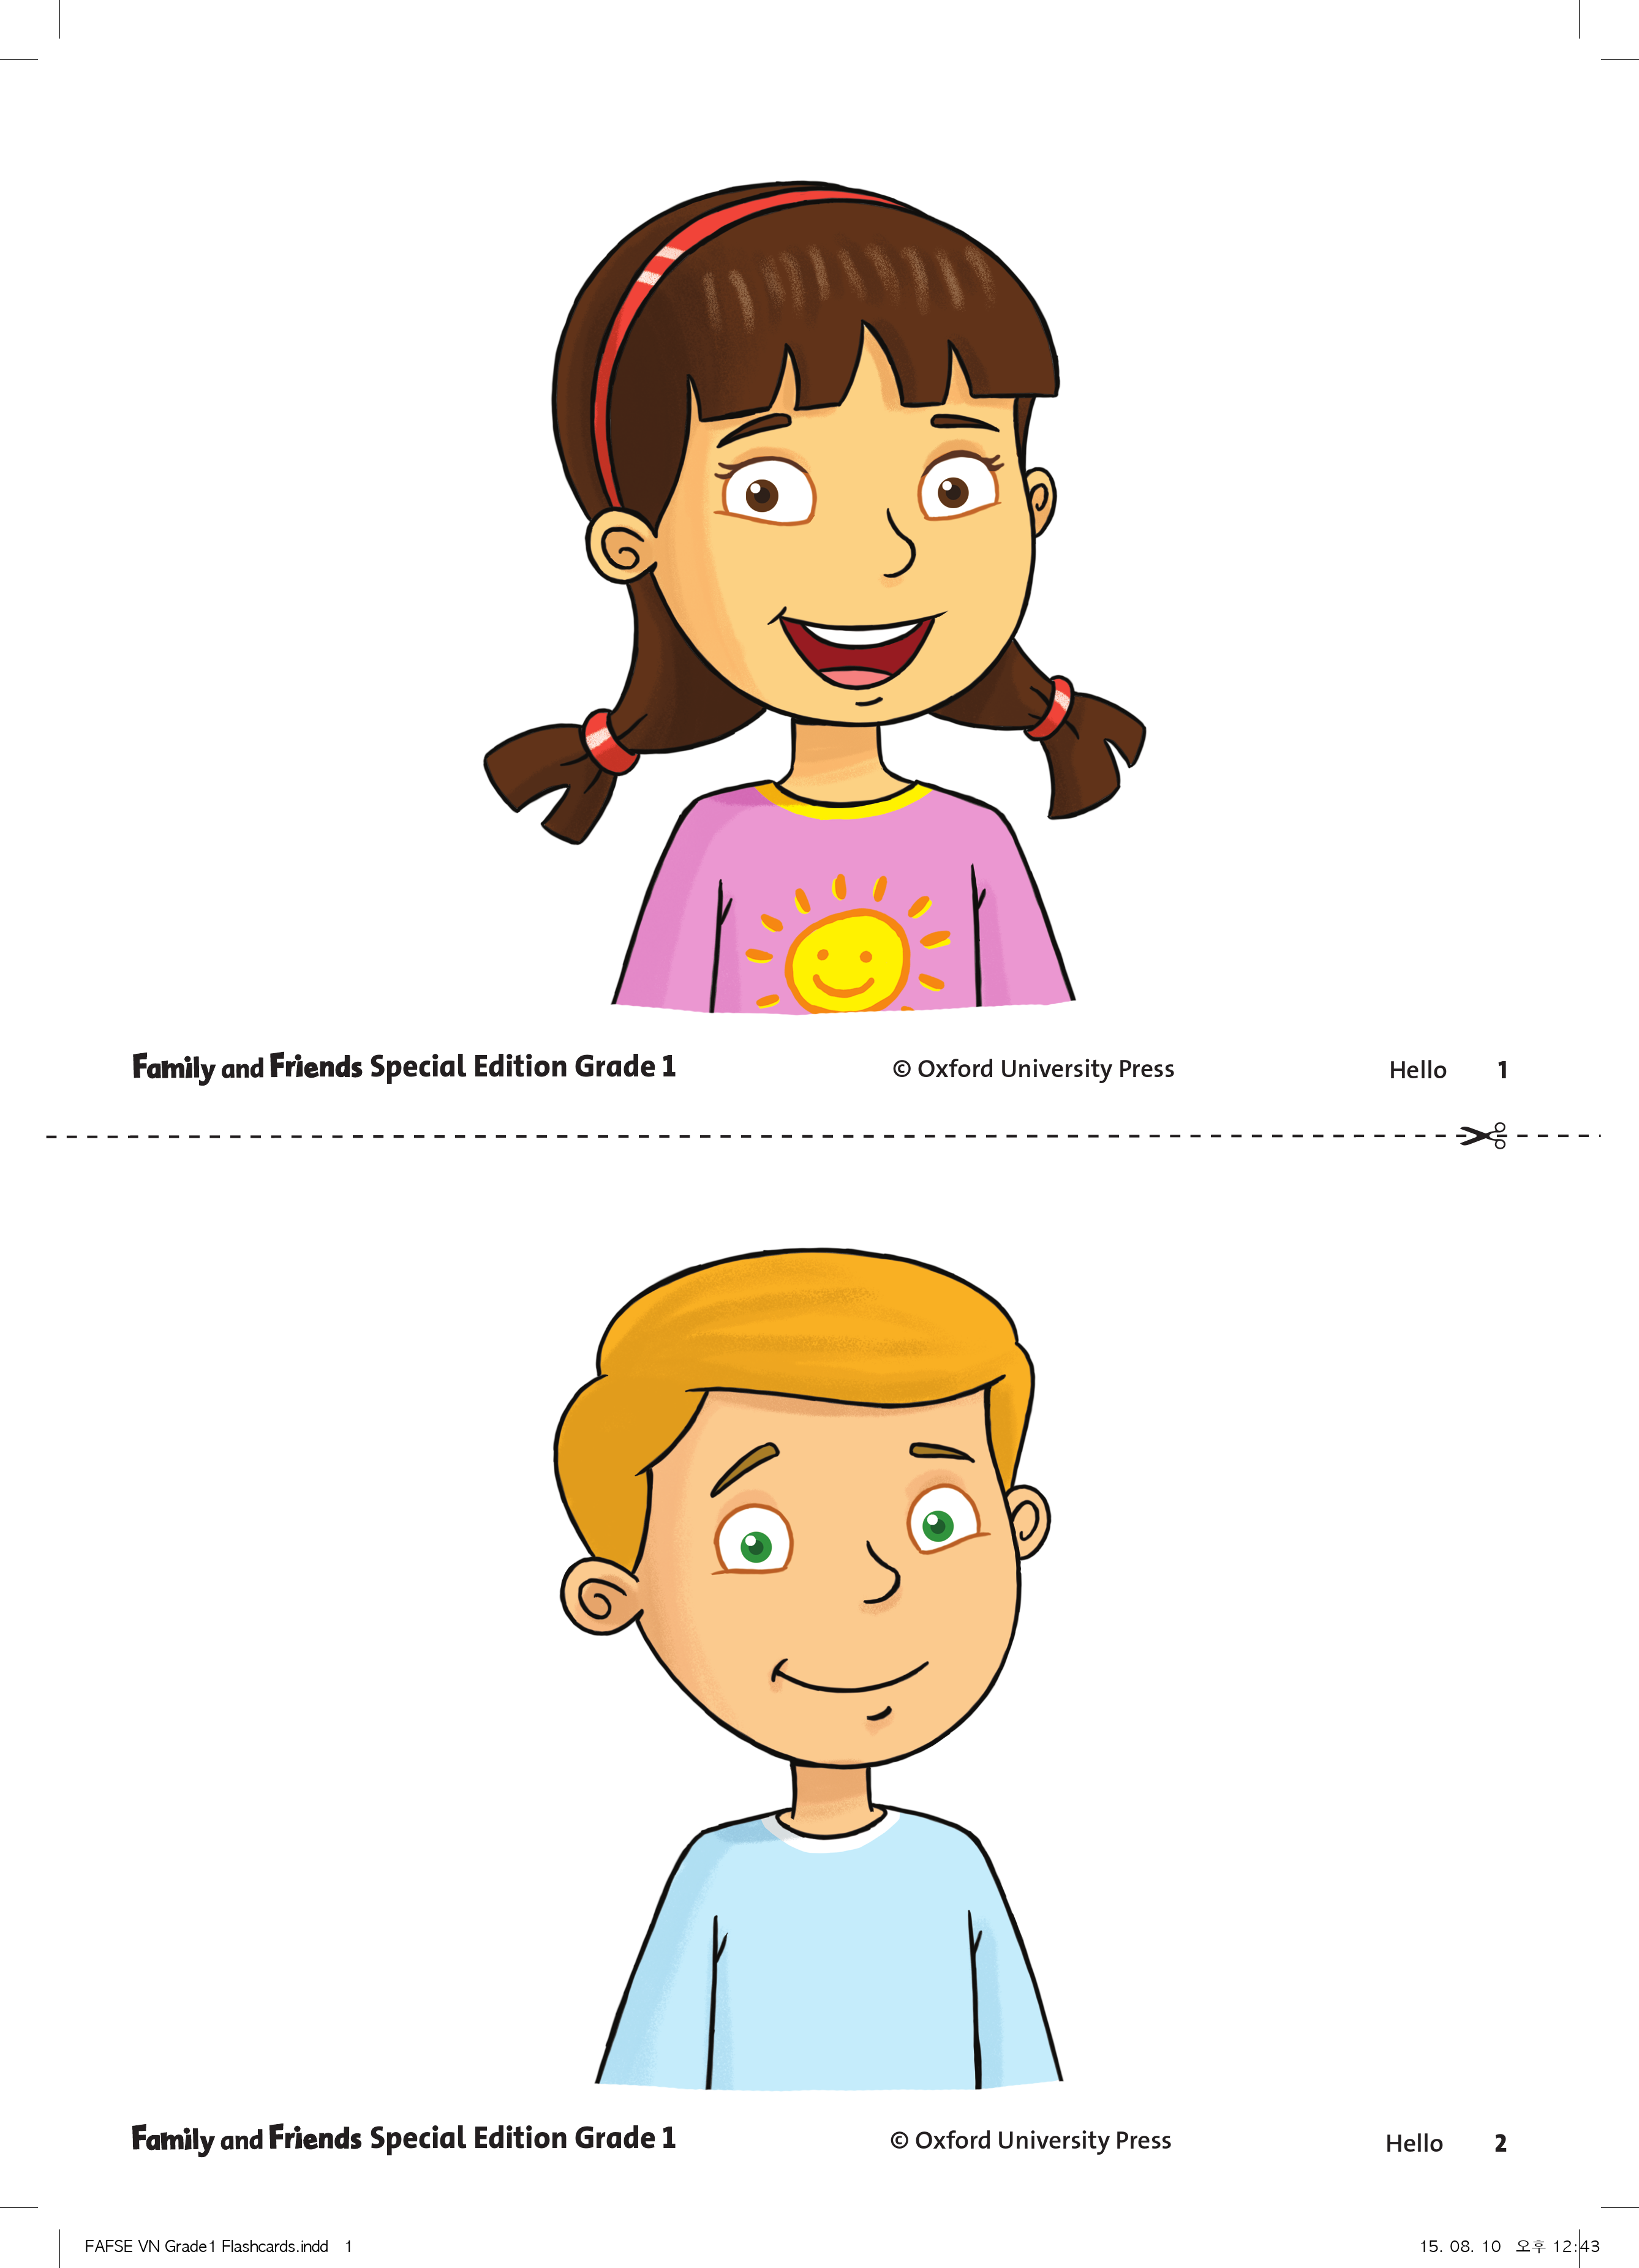 Starters flashcards. Family and friends Starter карточки. Family and friends Starter Flashcards. Family and friends 1 Flashcards. Family and friends 1 2nd Edition Flashcards.